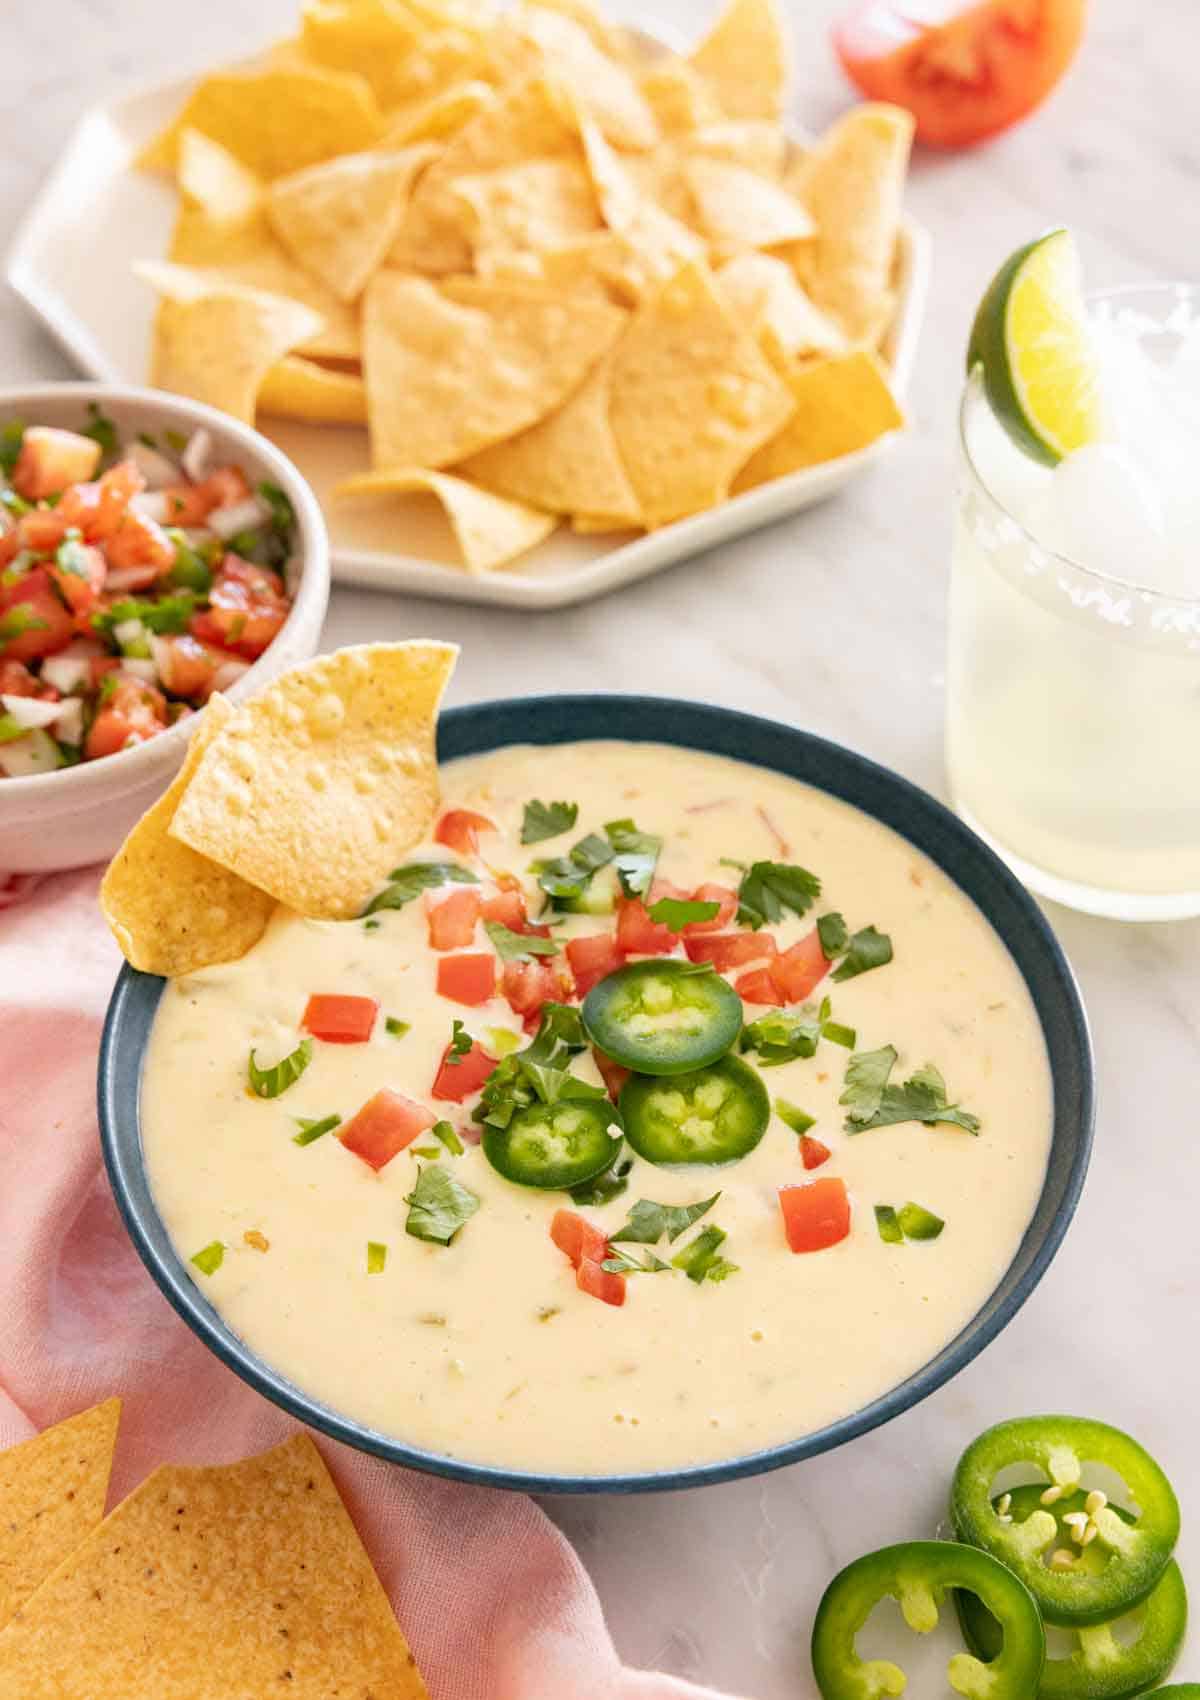 A bowl of queso dip with various toppings with a plate of chips and pico de gallo in the background.